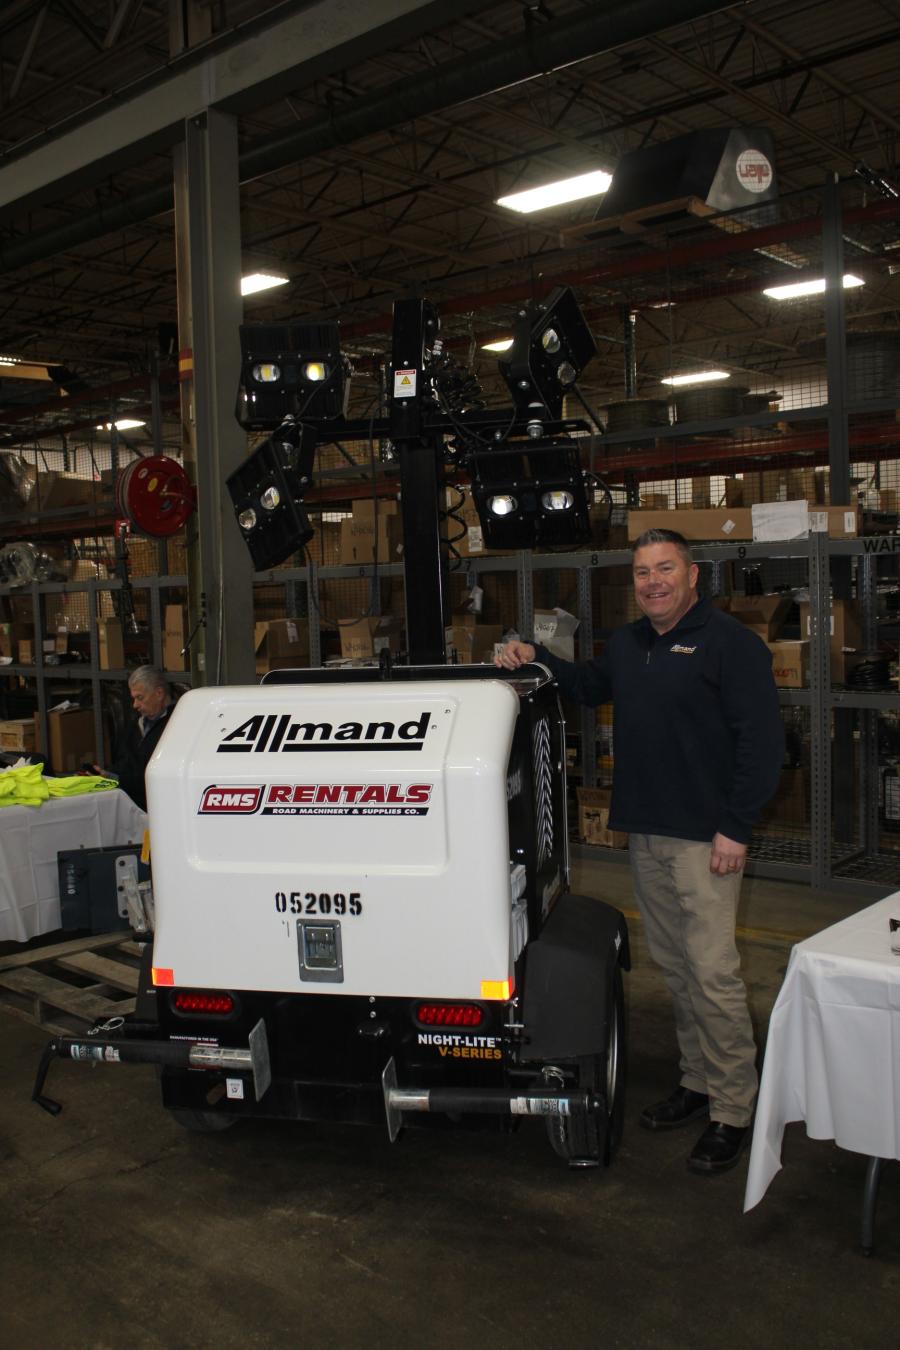 Tom Martin, territory sales manager of Allmand in Holdredge, Neb., brought a selection from Allmand’s extensive line of light towers and power systems.